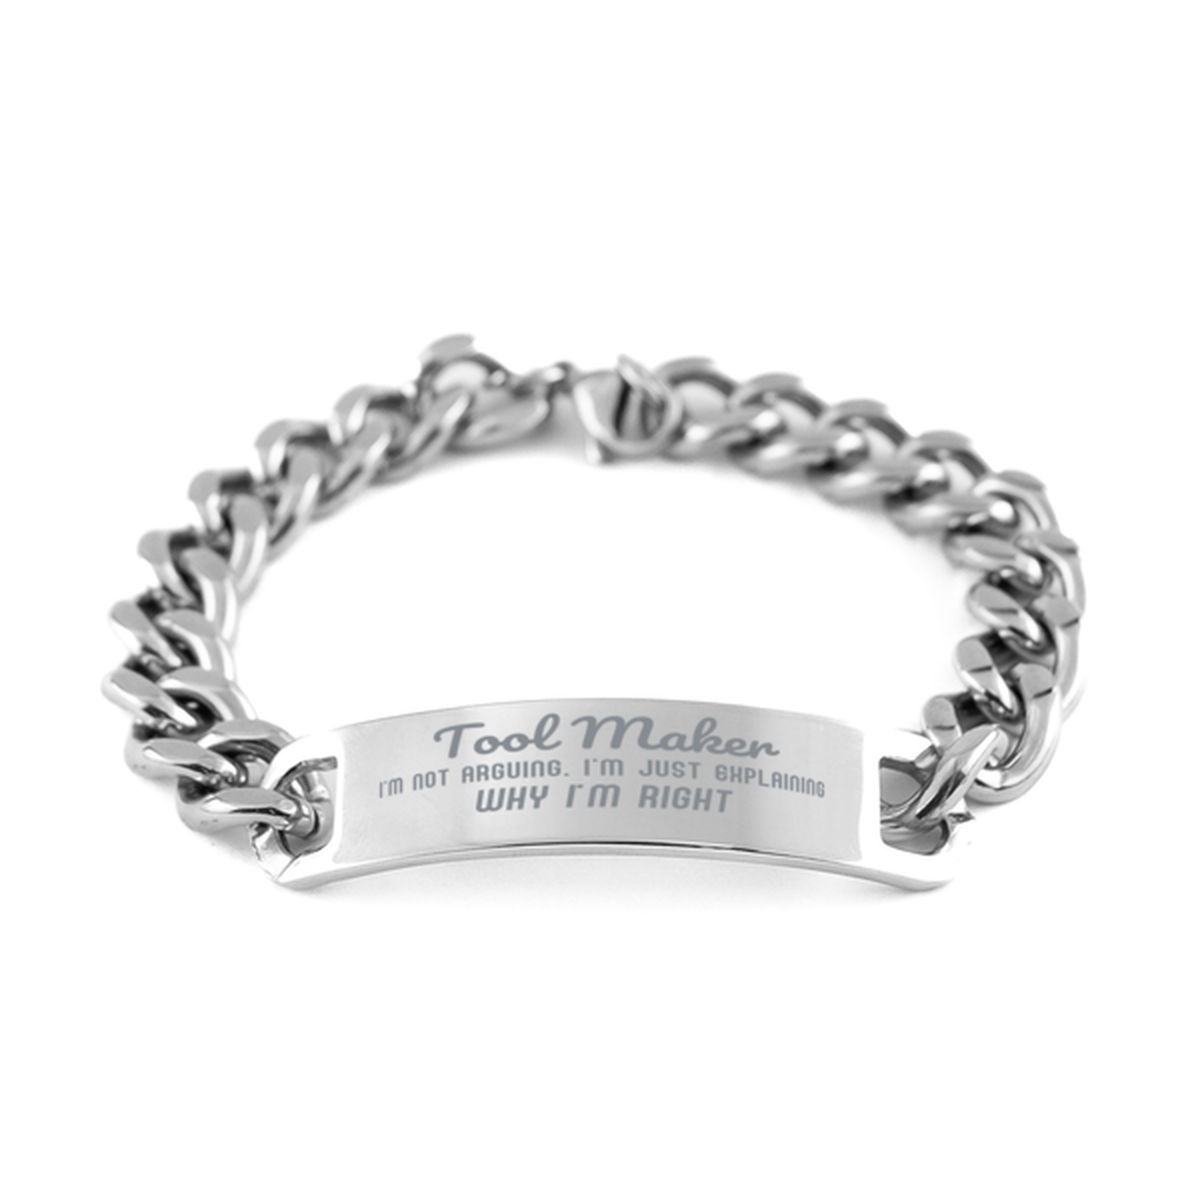 Tool Maker I'm not Arguing. I'm Just Explaining Why I'm RIGHT Cuban Chain Stainless Steel Bracelet, Graduation Birthday Christmas Tool Maker Gifts For Tool Maker Funny Saying Quote Present for Men Women Coworker